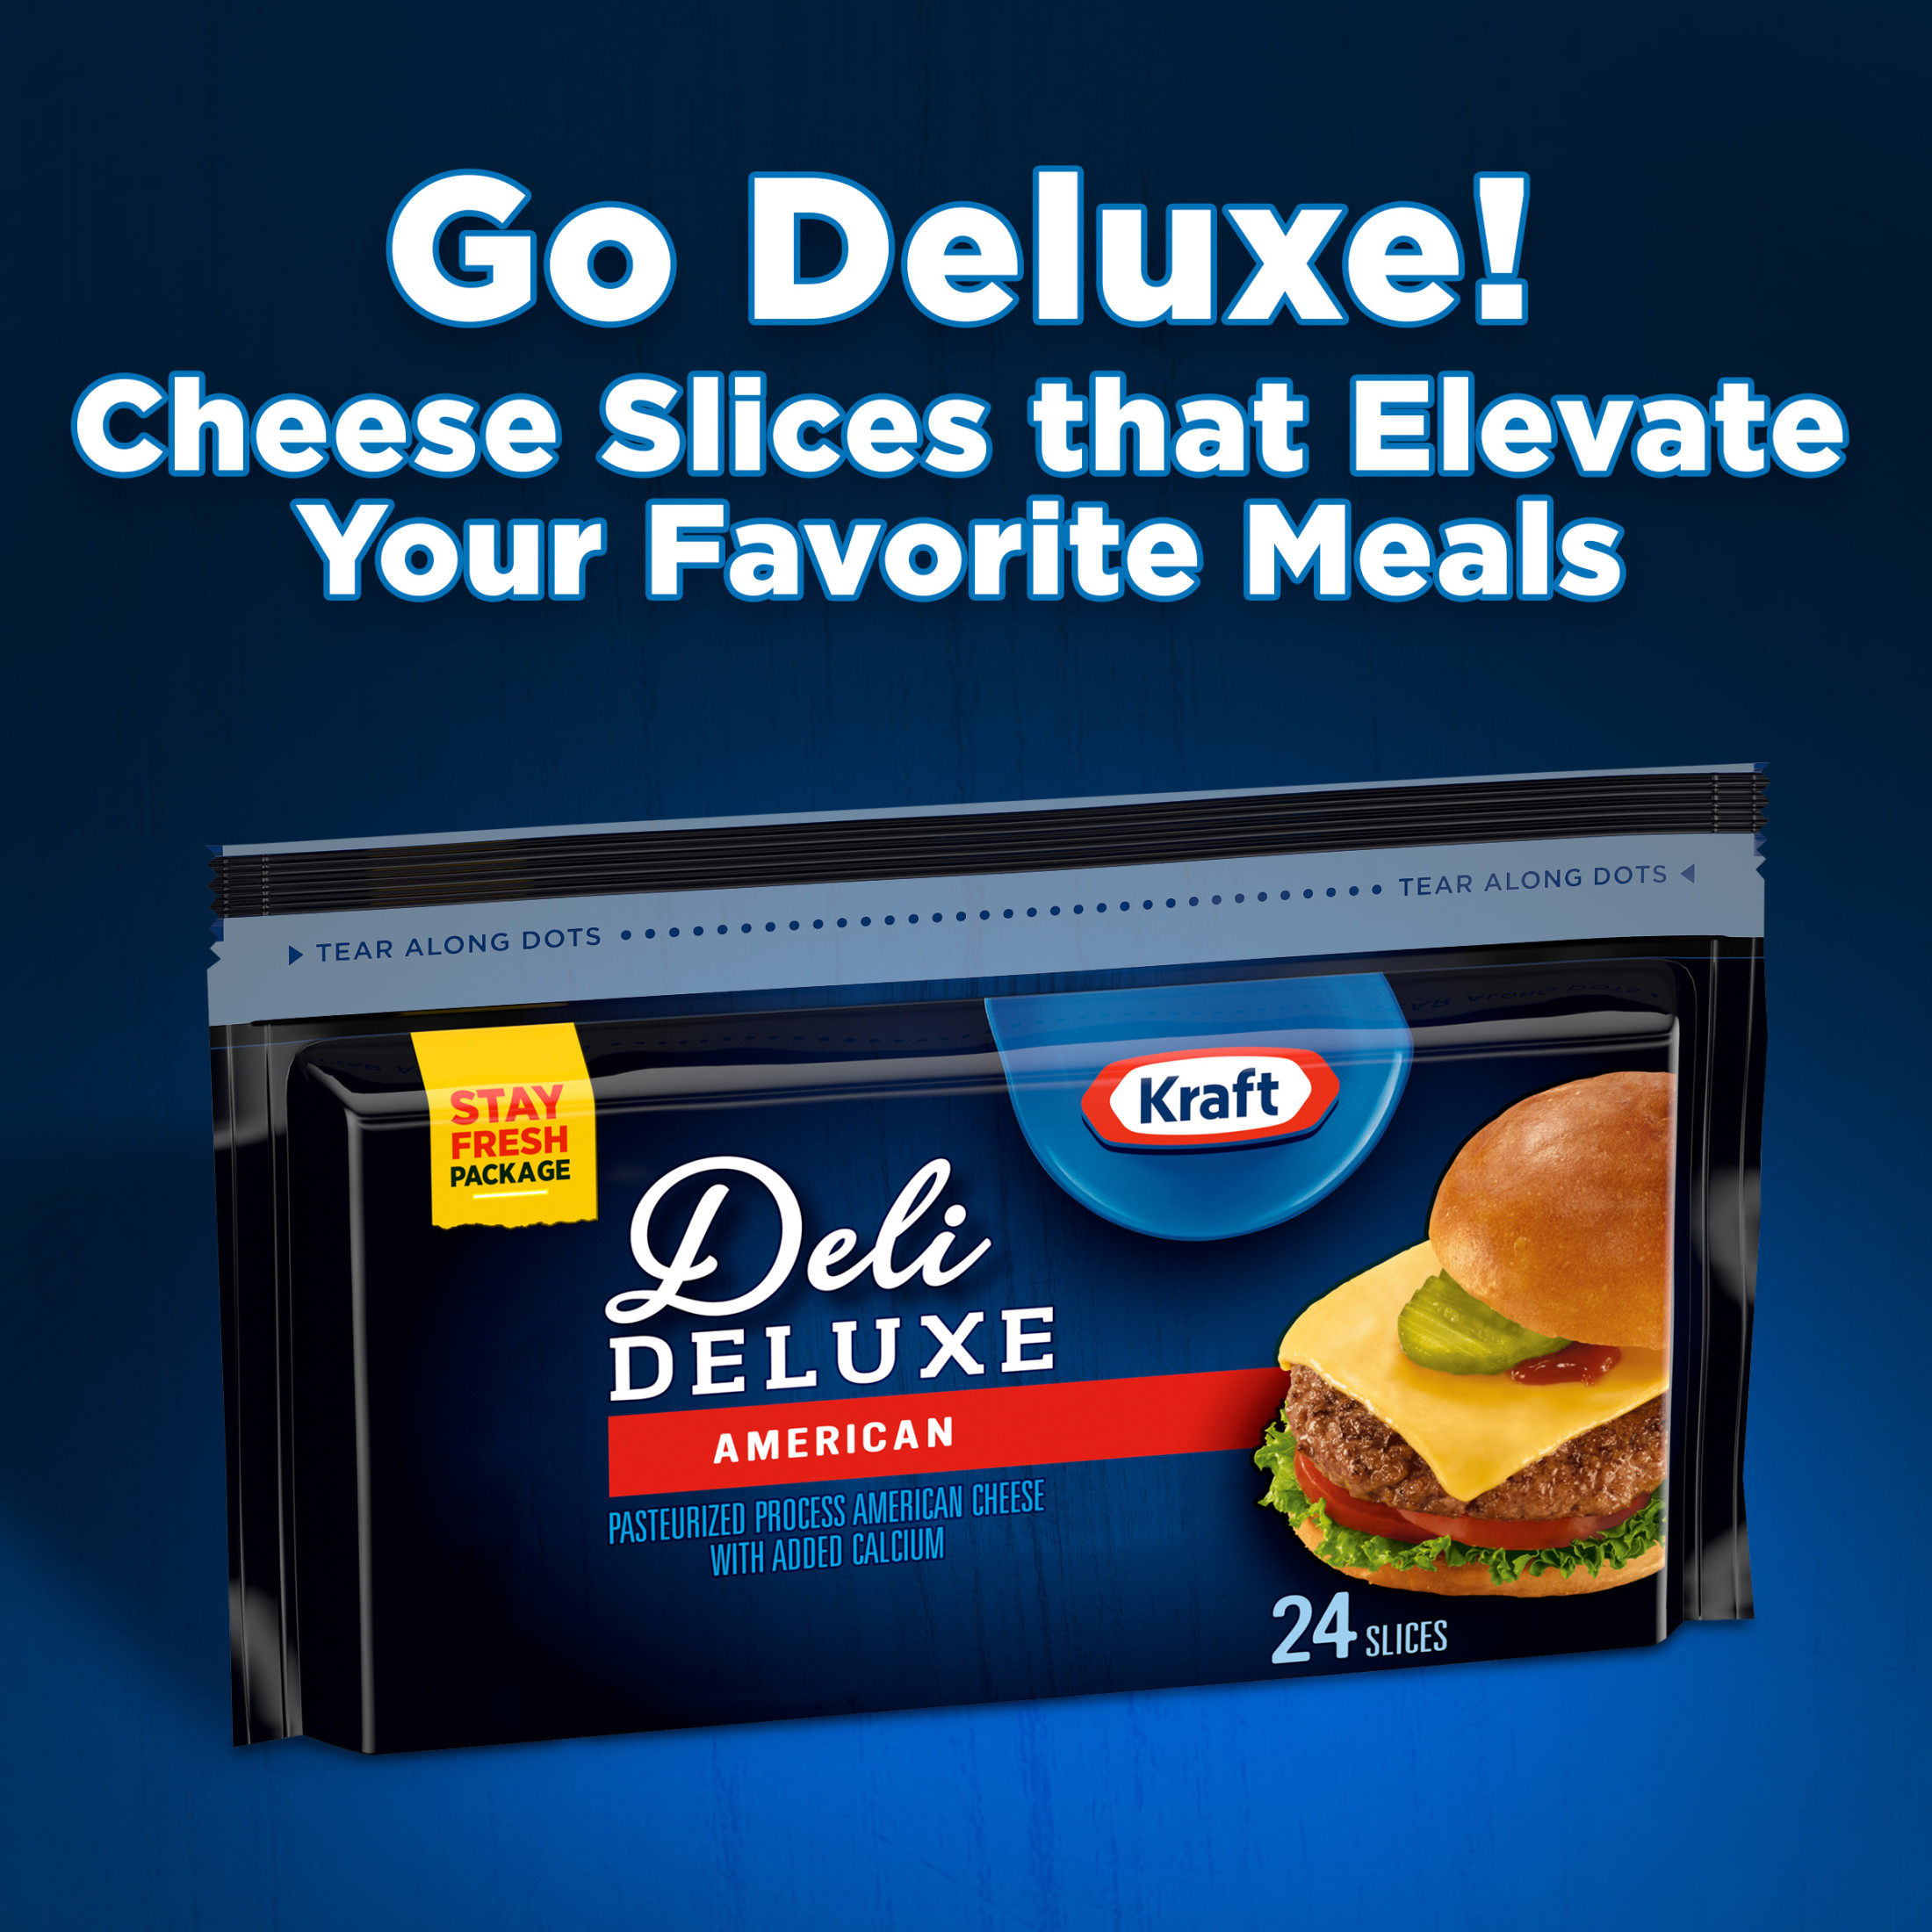 Kraft Deli Deluxe American Cheese Slices, 24 Ct Bag - image 3 of 13